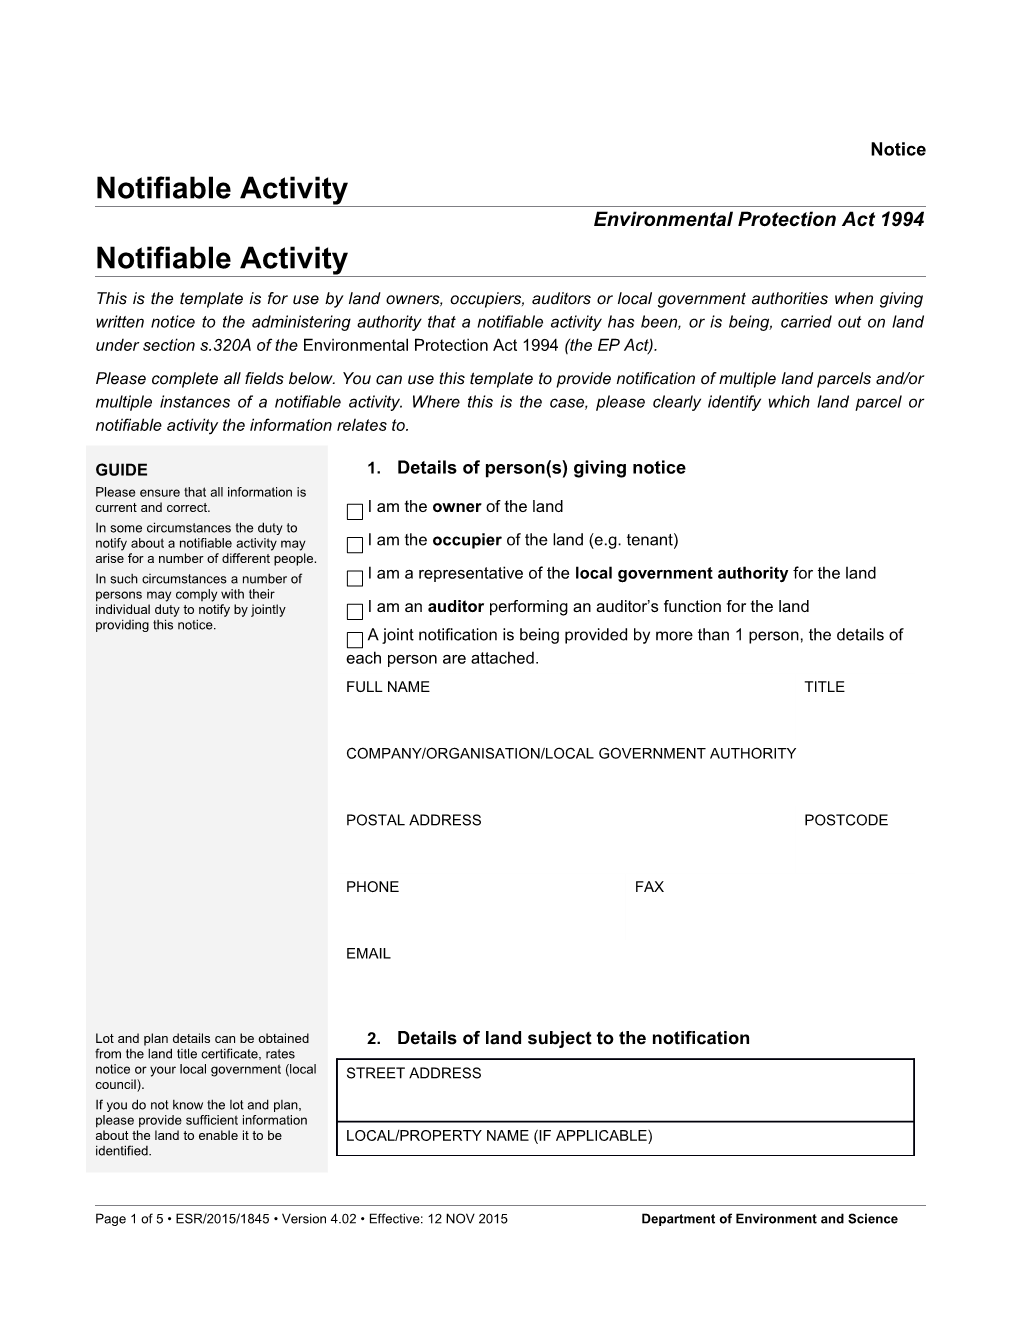 Template for Giving Written Notice About a Notifiable Activity